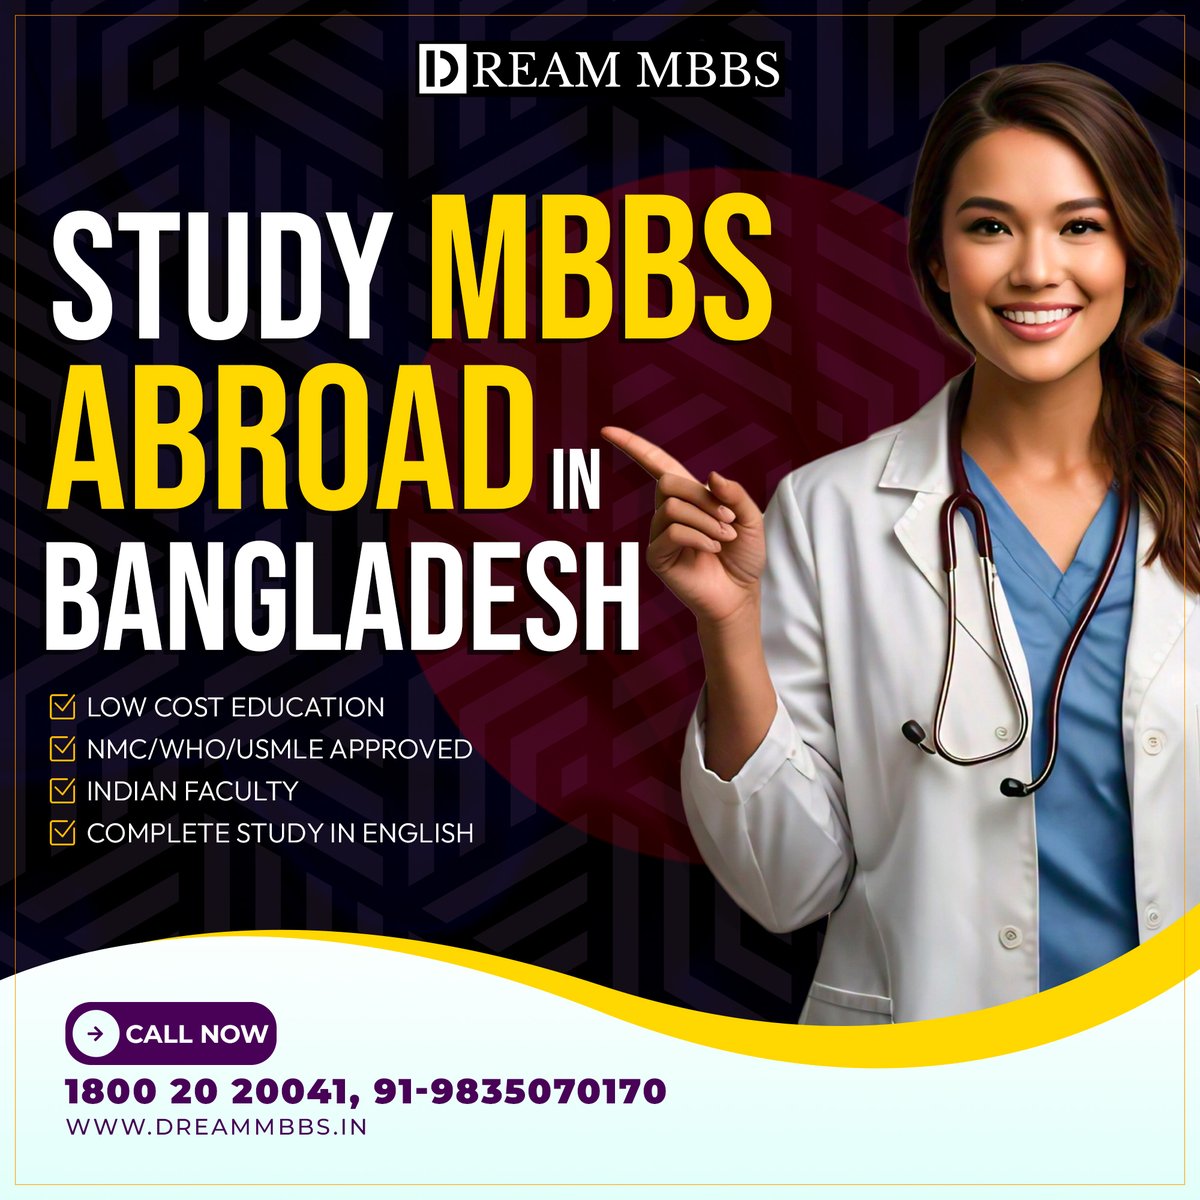 Unlock your potential in medicine! 
Explore unparalleled opportunities to study MBBS in Bangladesh
Start your medical career on the right path from Bangladesh.
Call us at 18002020041 or 9835070170
__
#mbbsabroad2024 #dreammbbs #drmrinal #studyabroad #mbbsbangladesh #mbbsabroad